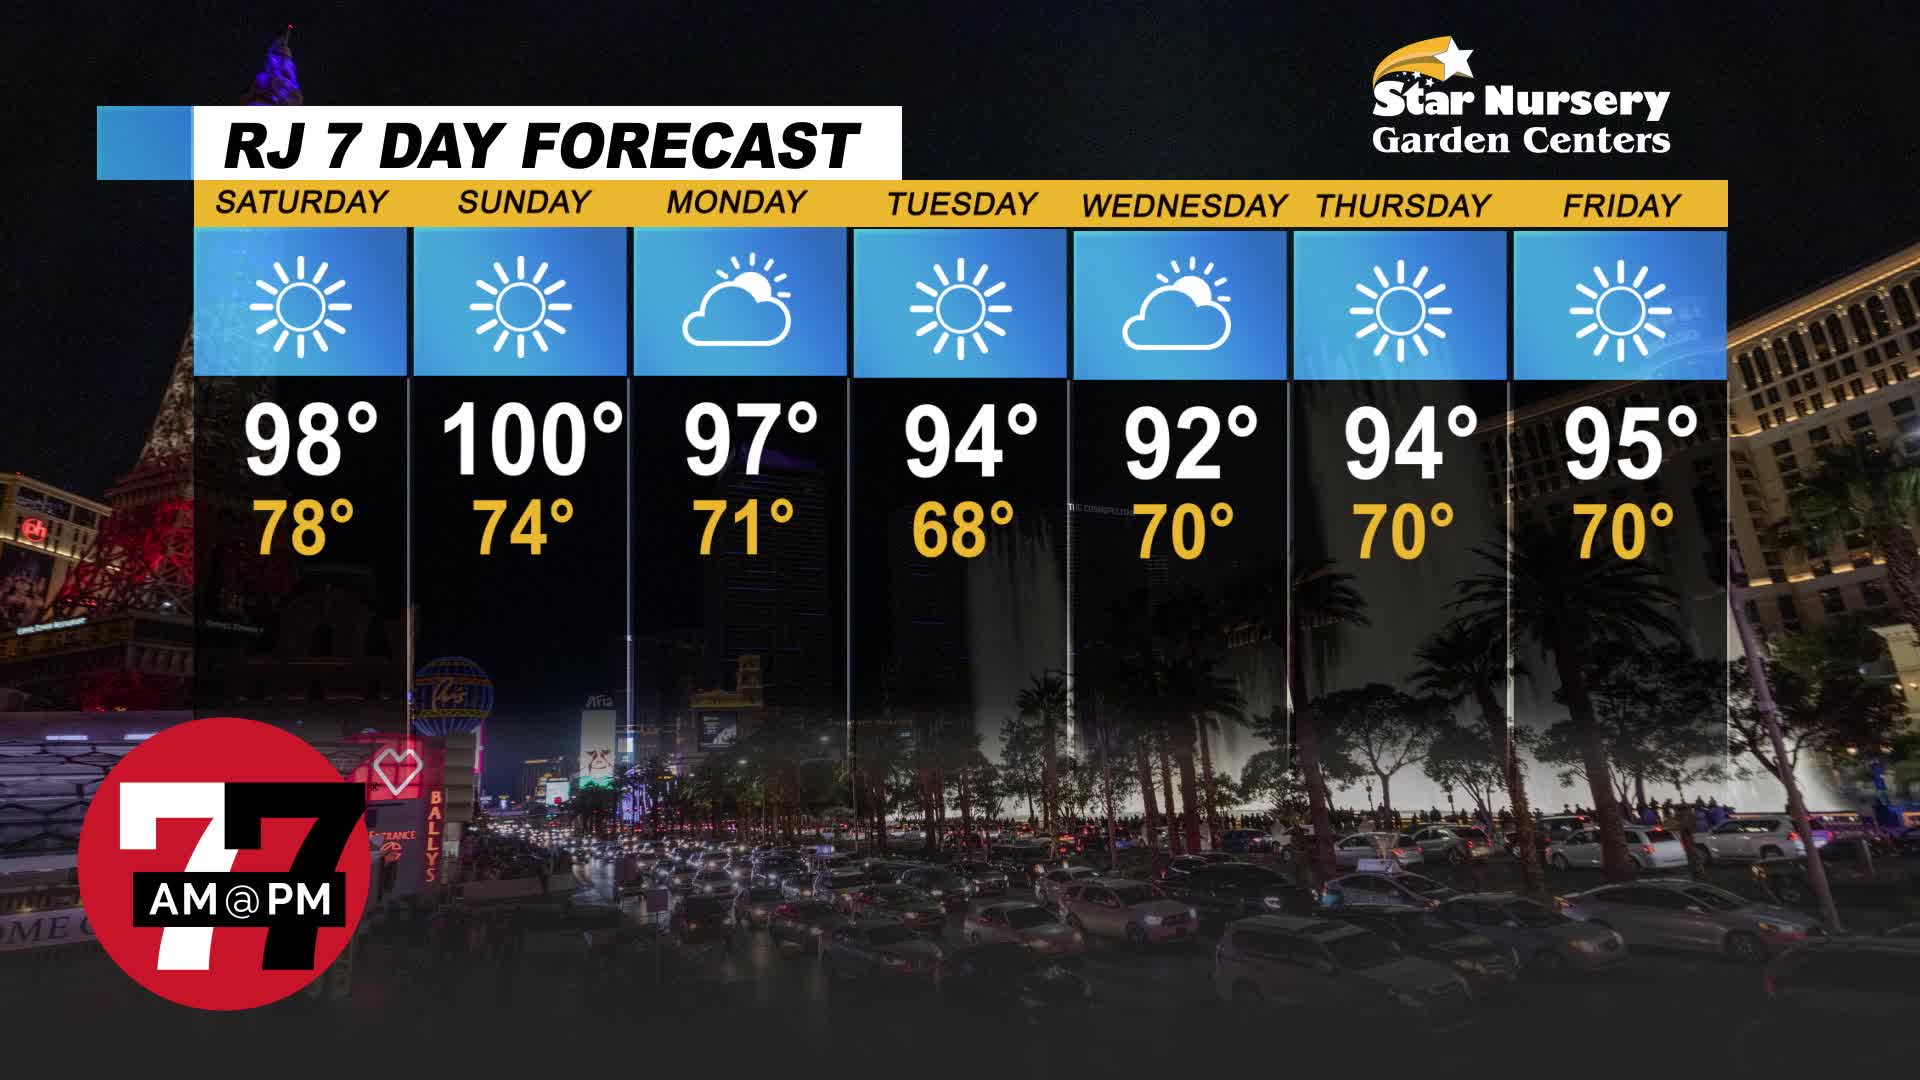 Temps might hit 100 over the weekend